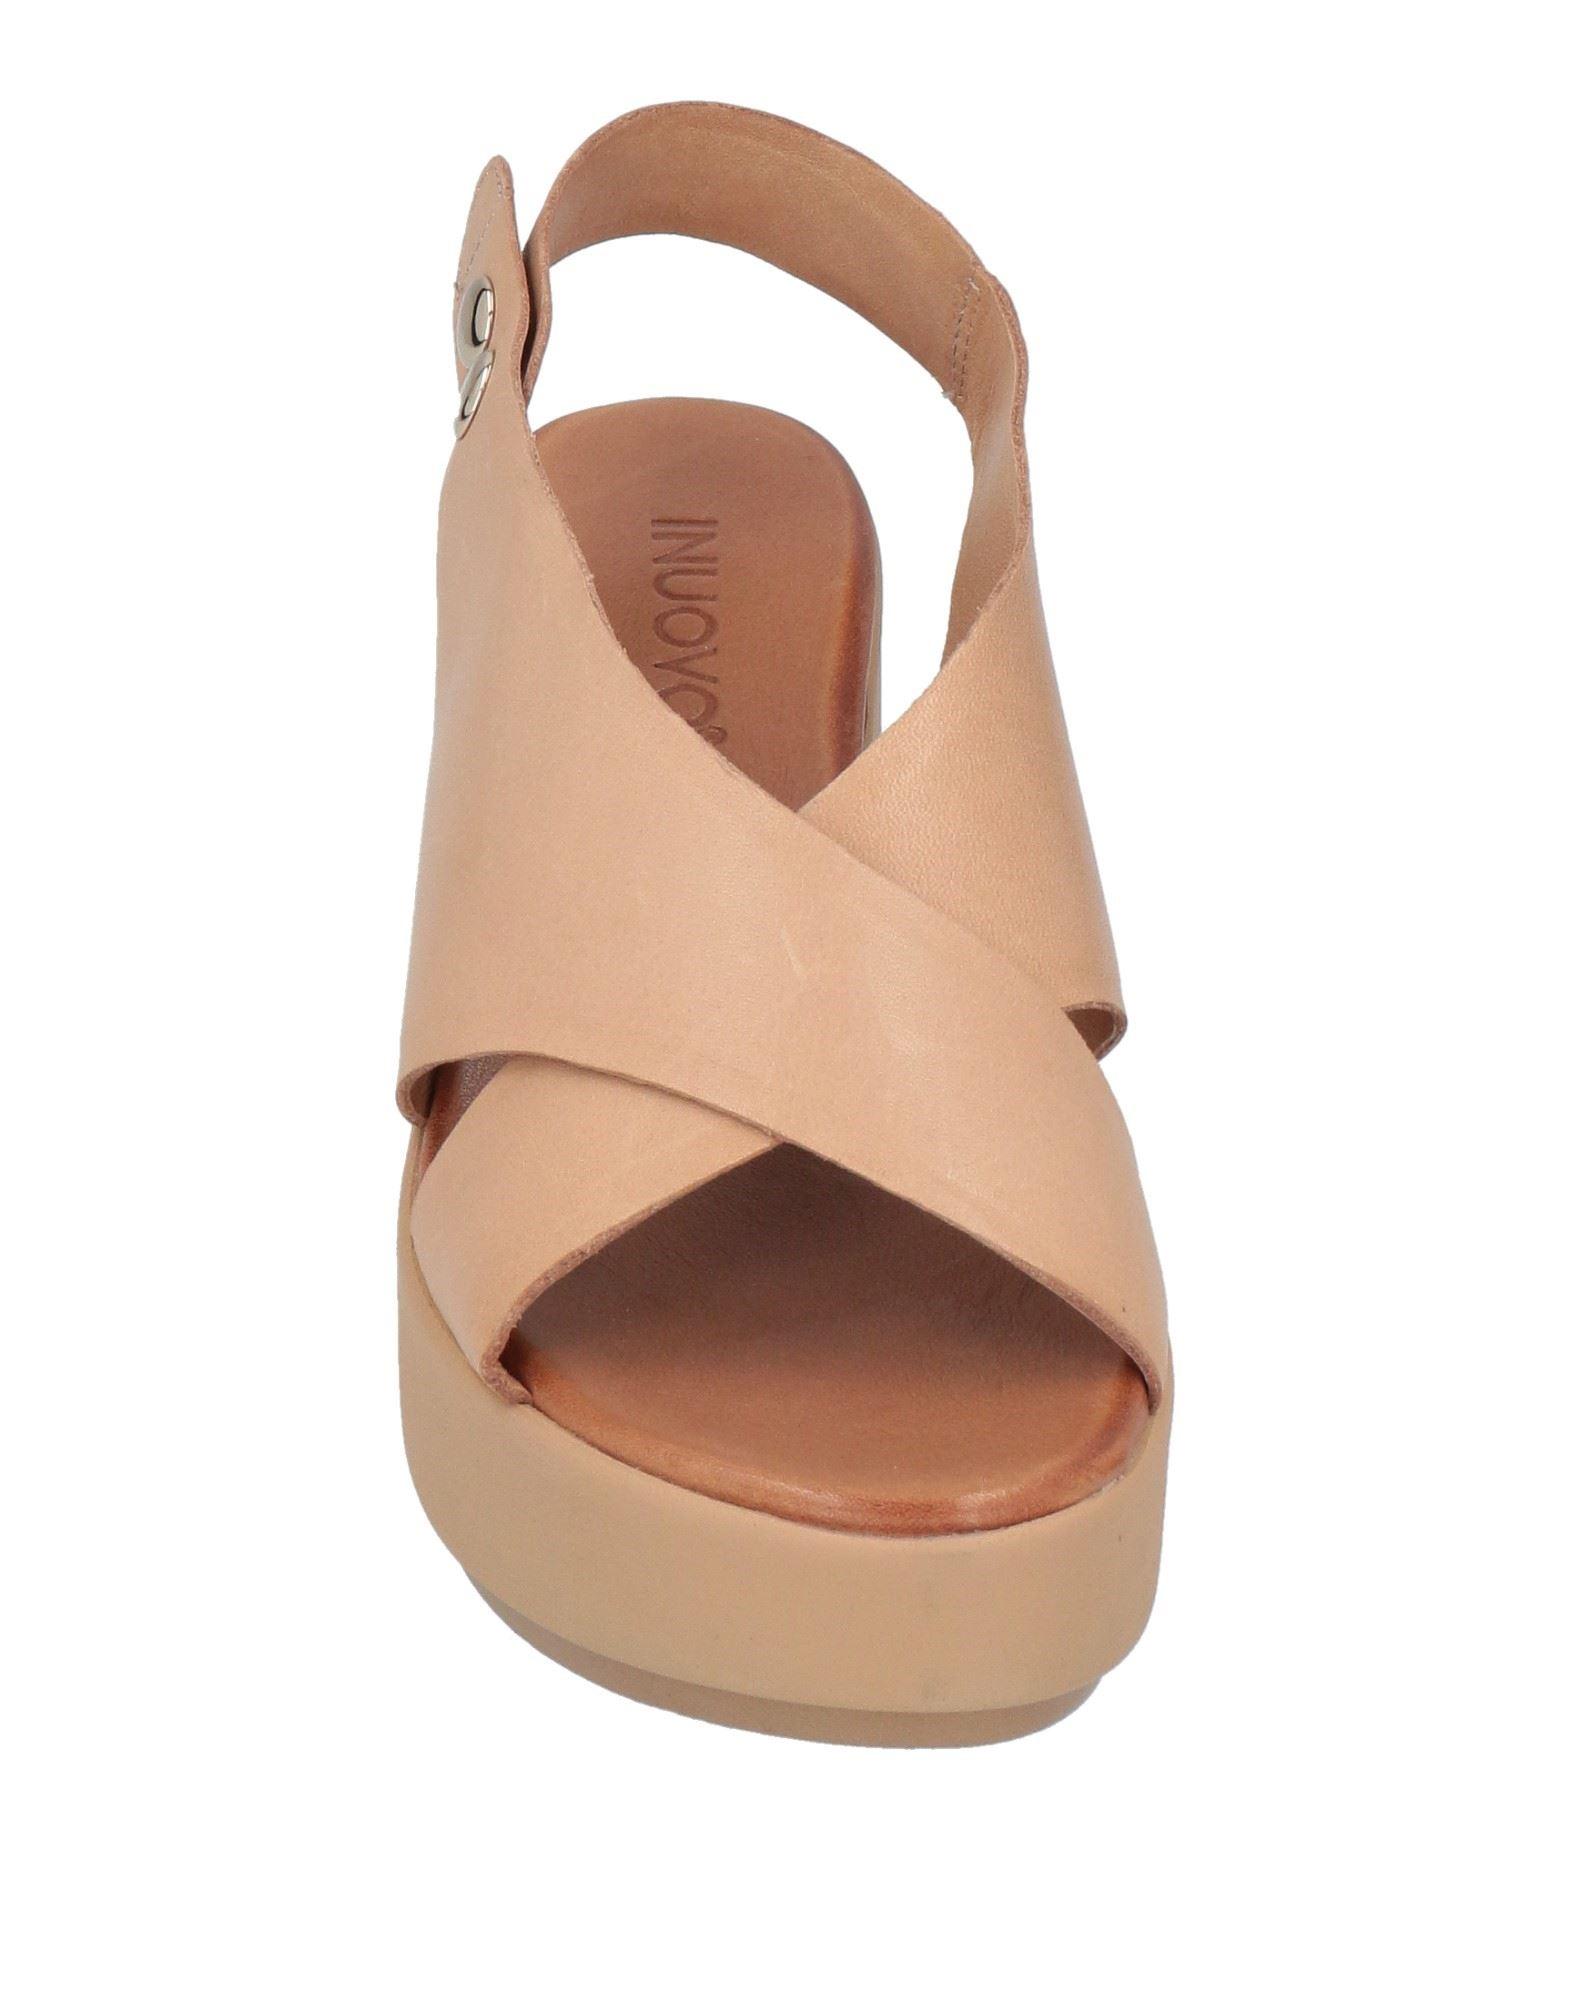 Inuovo Sandals | Lyst